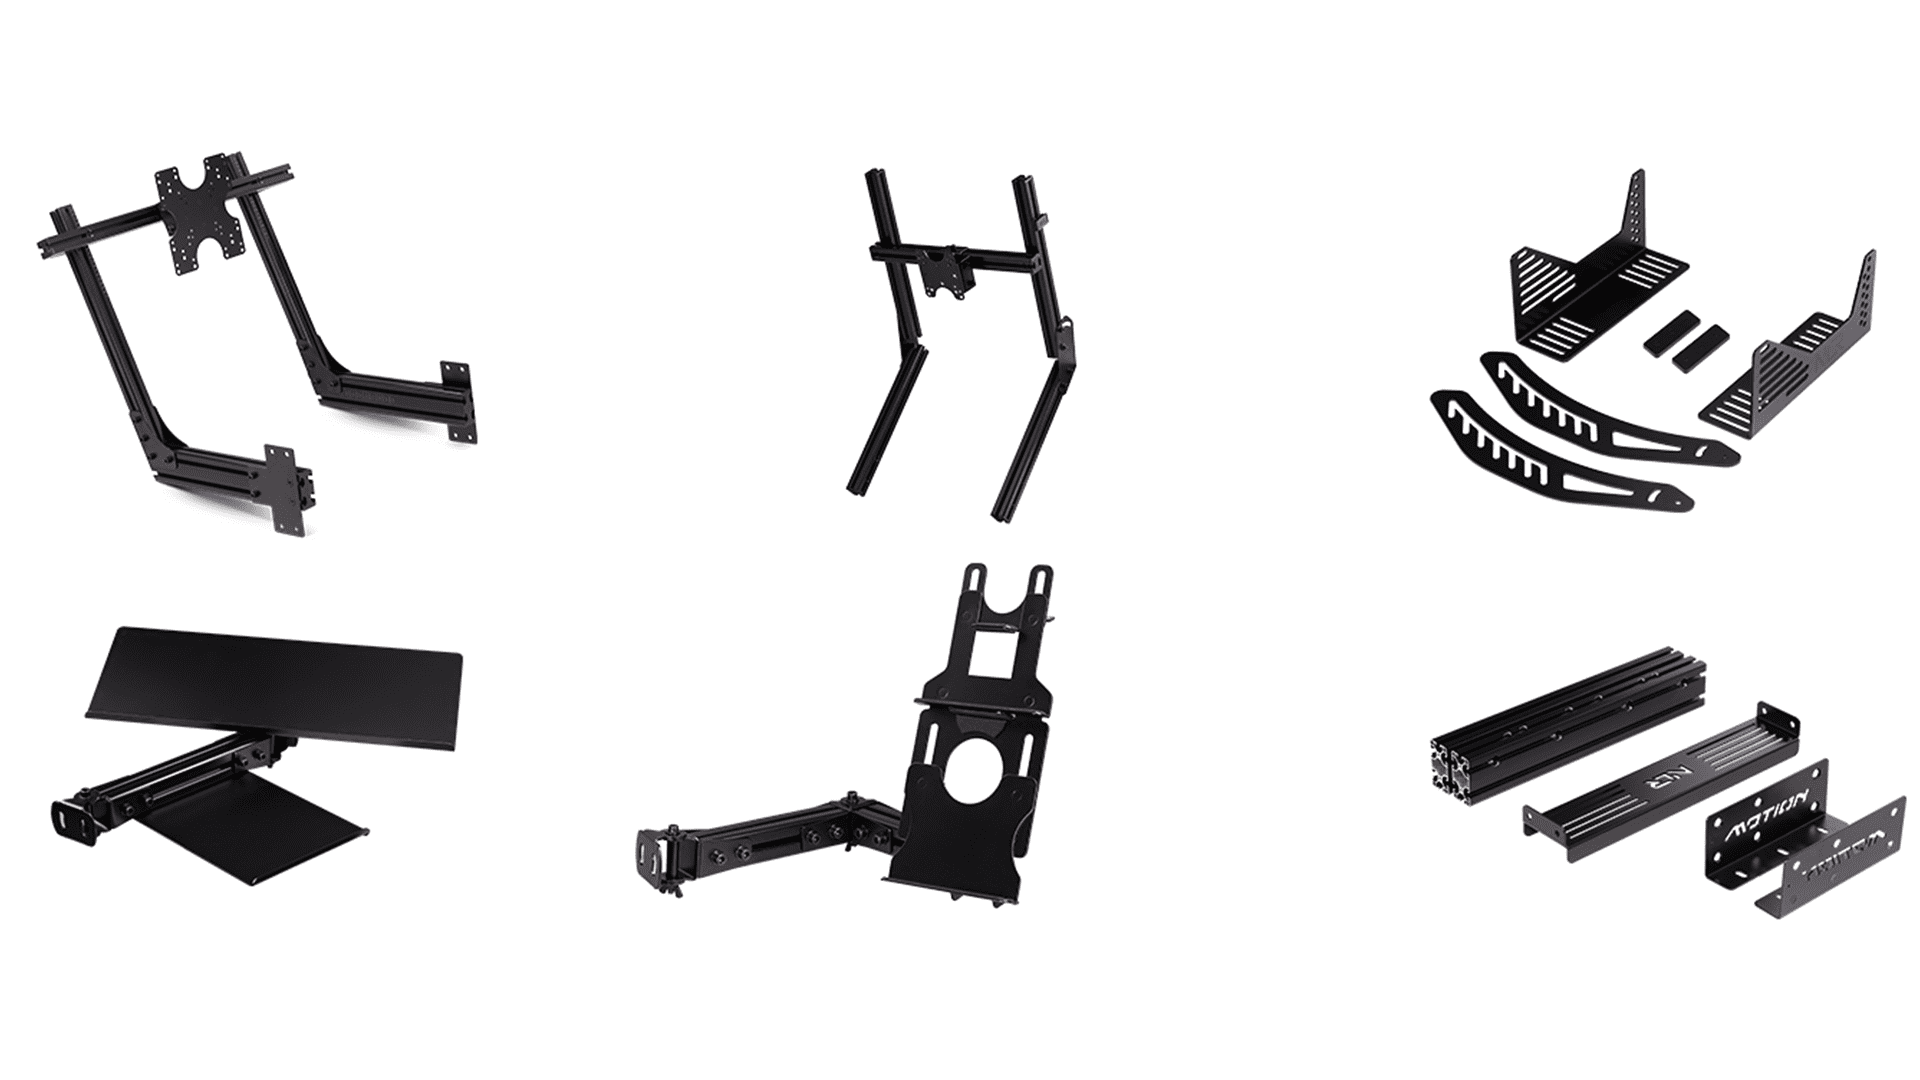 Next Level Racing releases new rig-enhancing Elite Series accessories